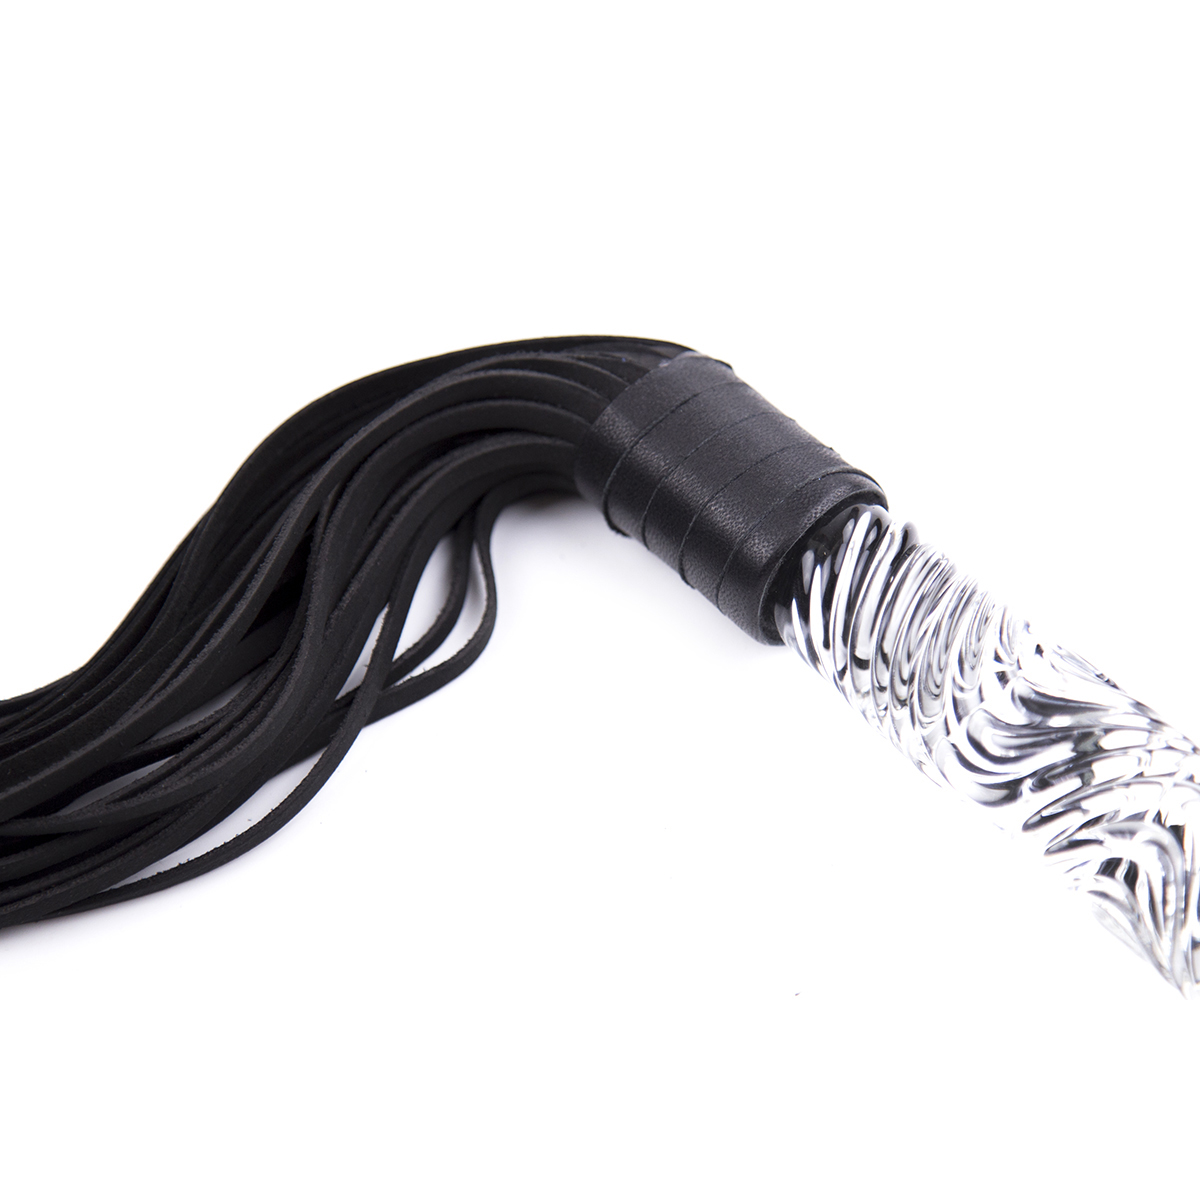 Fancy-Black-Flogger-with-Glass-Handle-OPR-321103-2